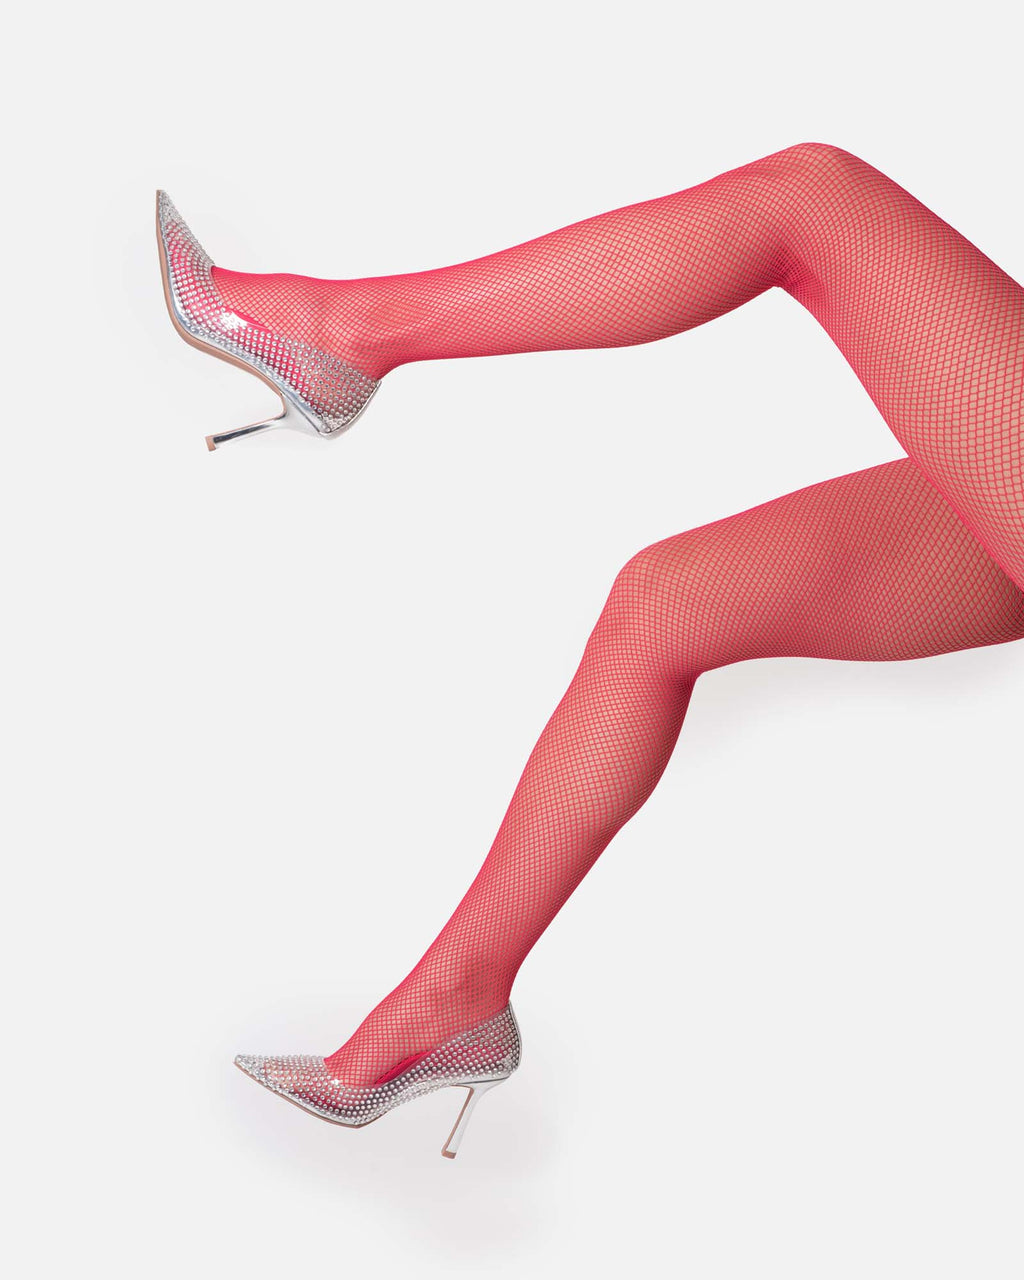 Women's Pink Floral Fishnet Tights, Pantyhose – TheMirrorTable